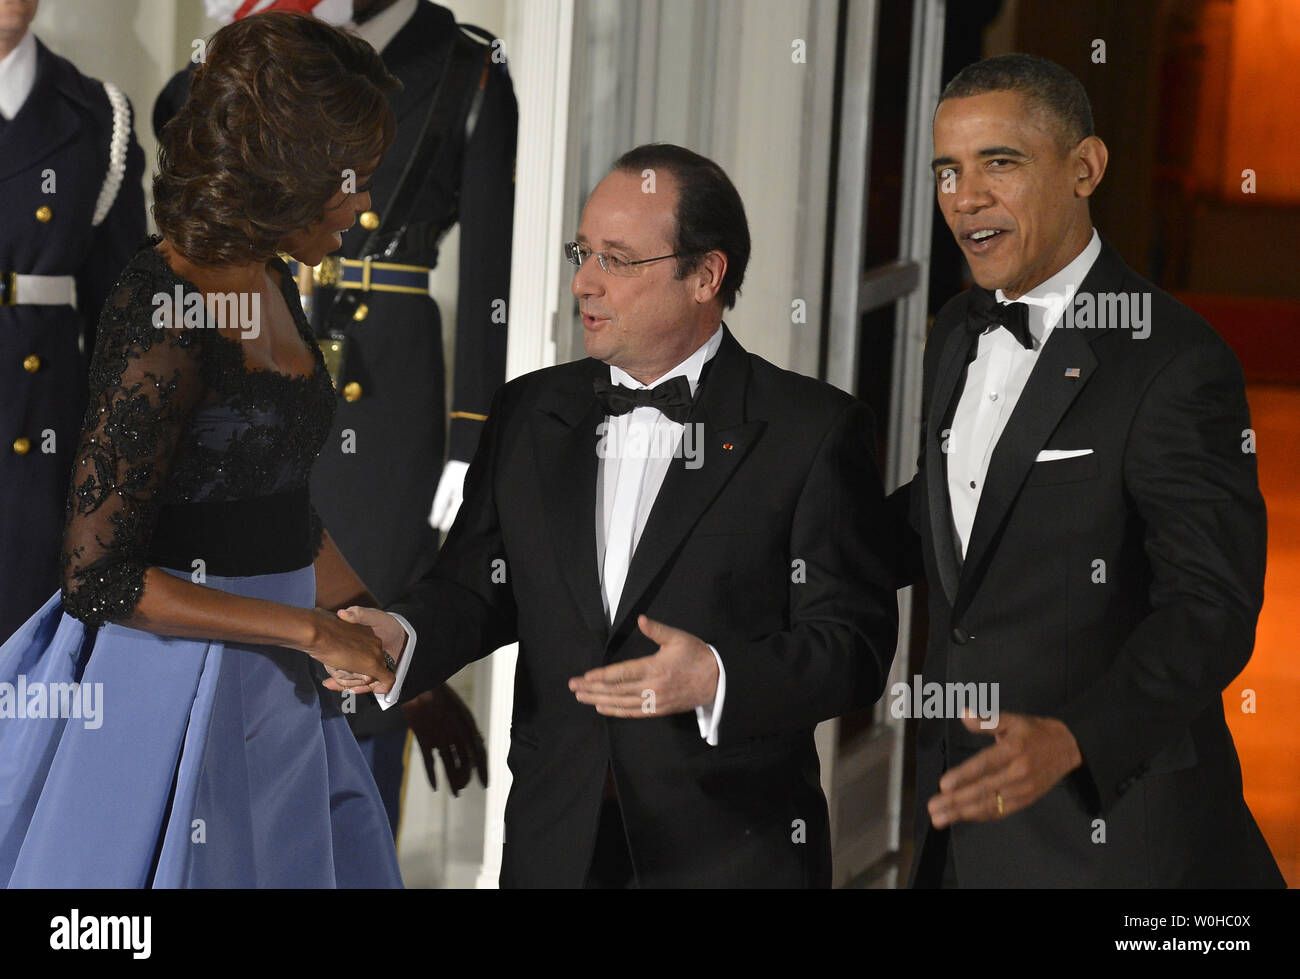 US President Barack Obama (R) and First Lady Michelle Obama welcome French President Francois Hollande for a State Dinner at the White House, February 11, 2014, in Washington, DC. Hollande is on a State Visit to strengthen bilateral, trade, economic and security ties.       UPI/Mike Theiler Stock Photo